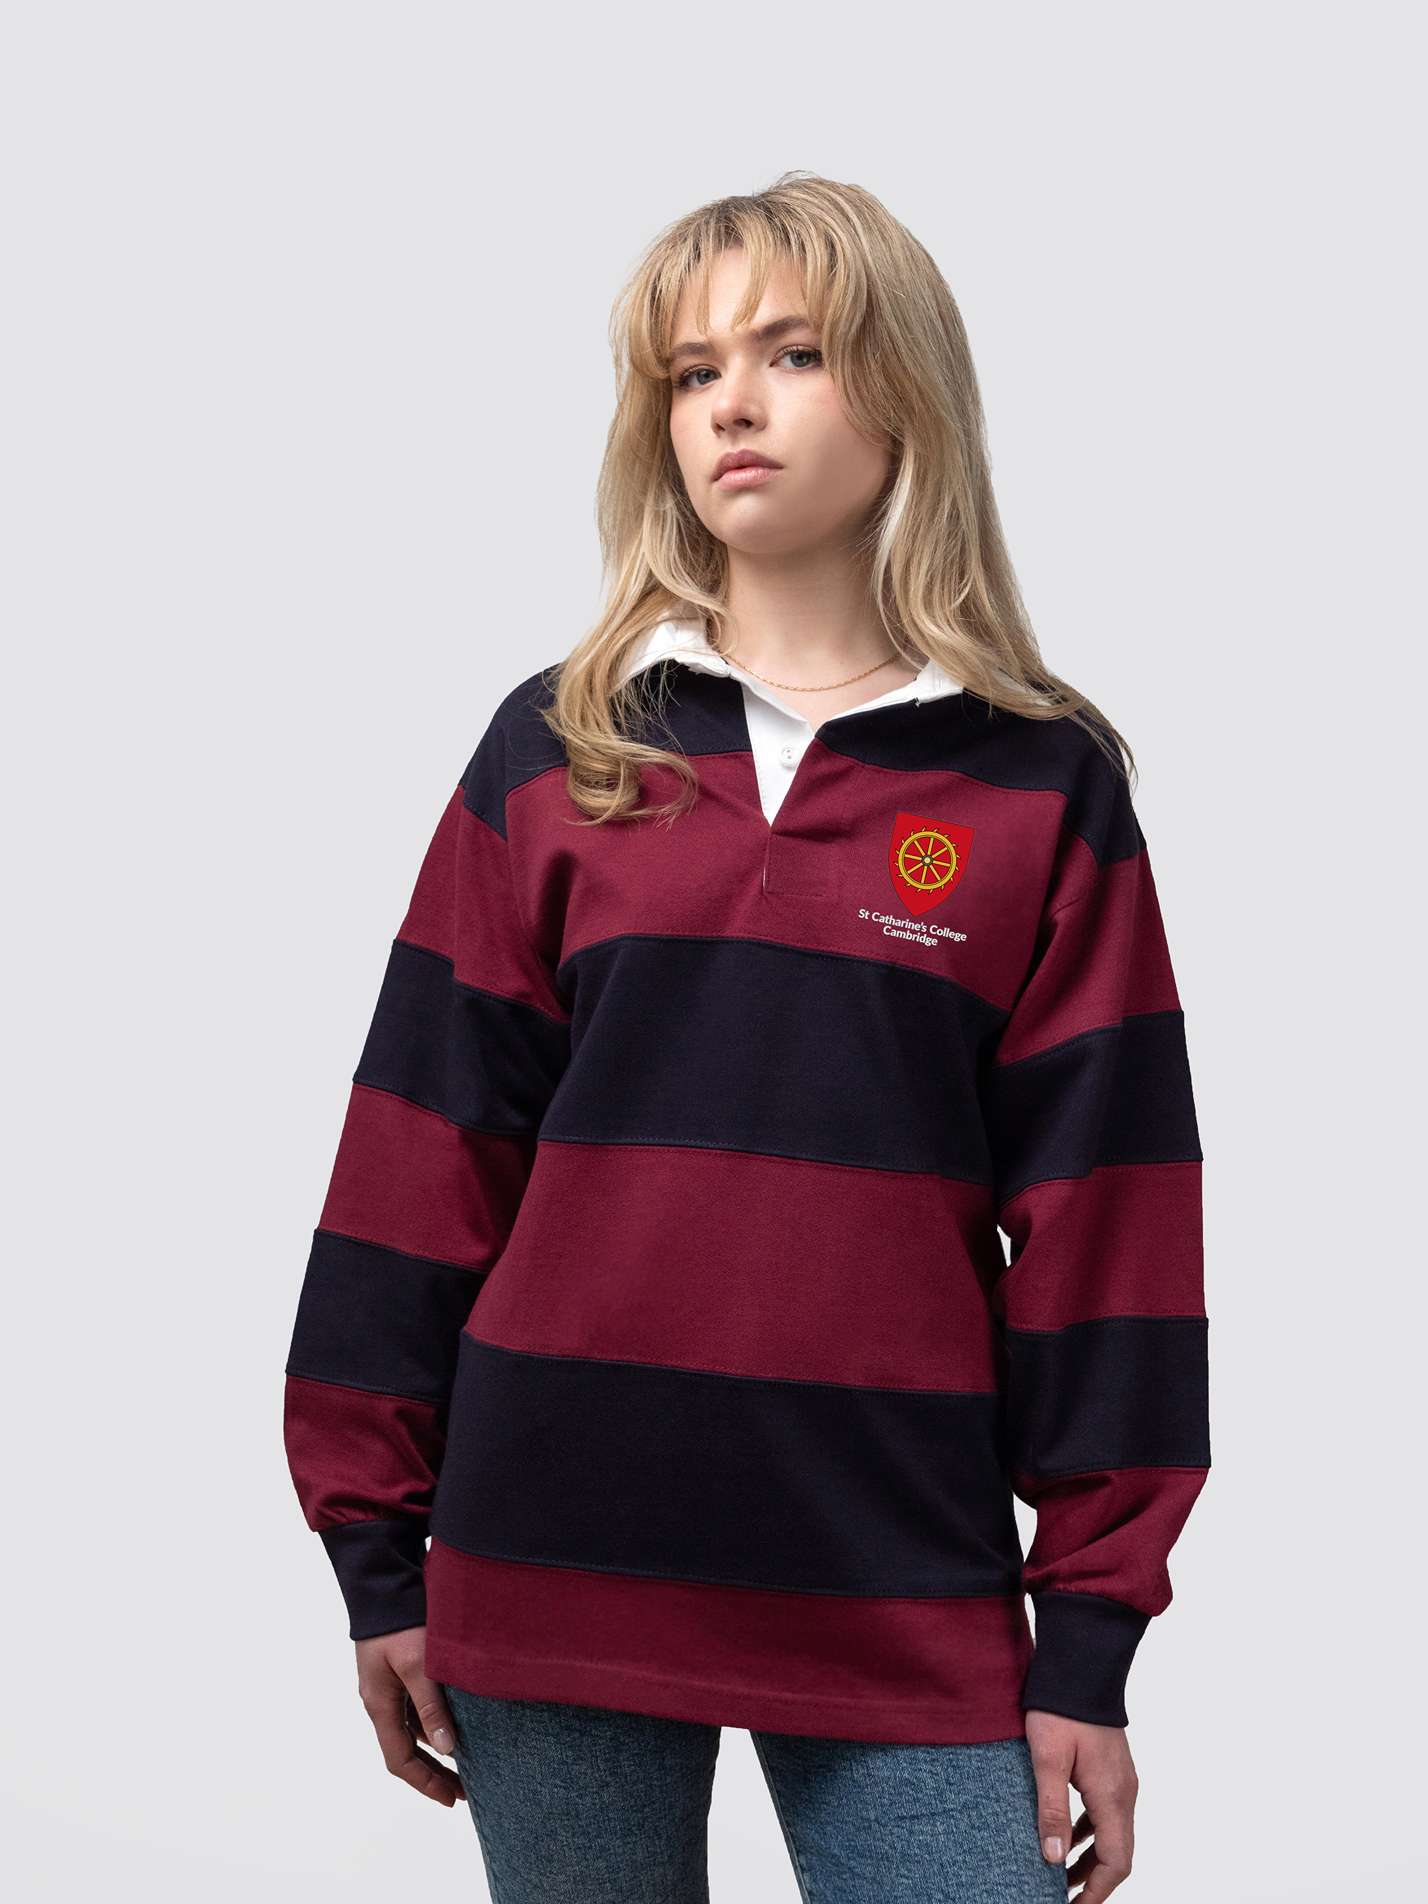 St Catharine's College rugby shirt, with burgundy and navy stripes